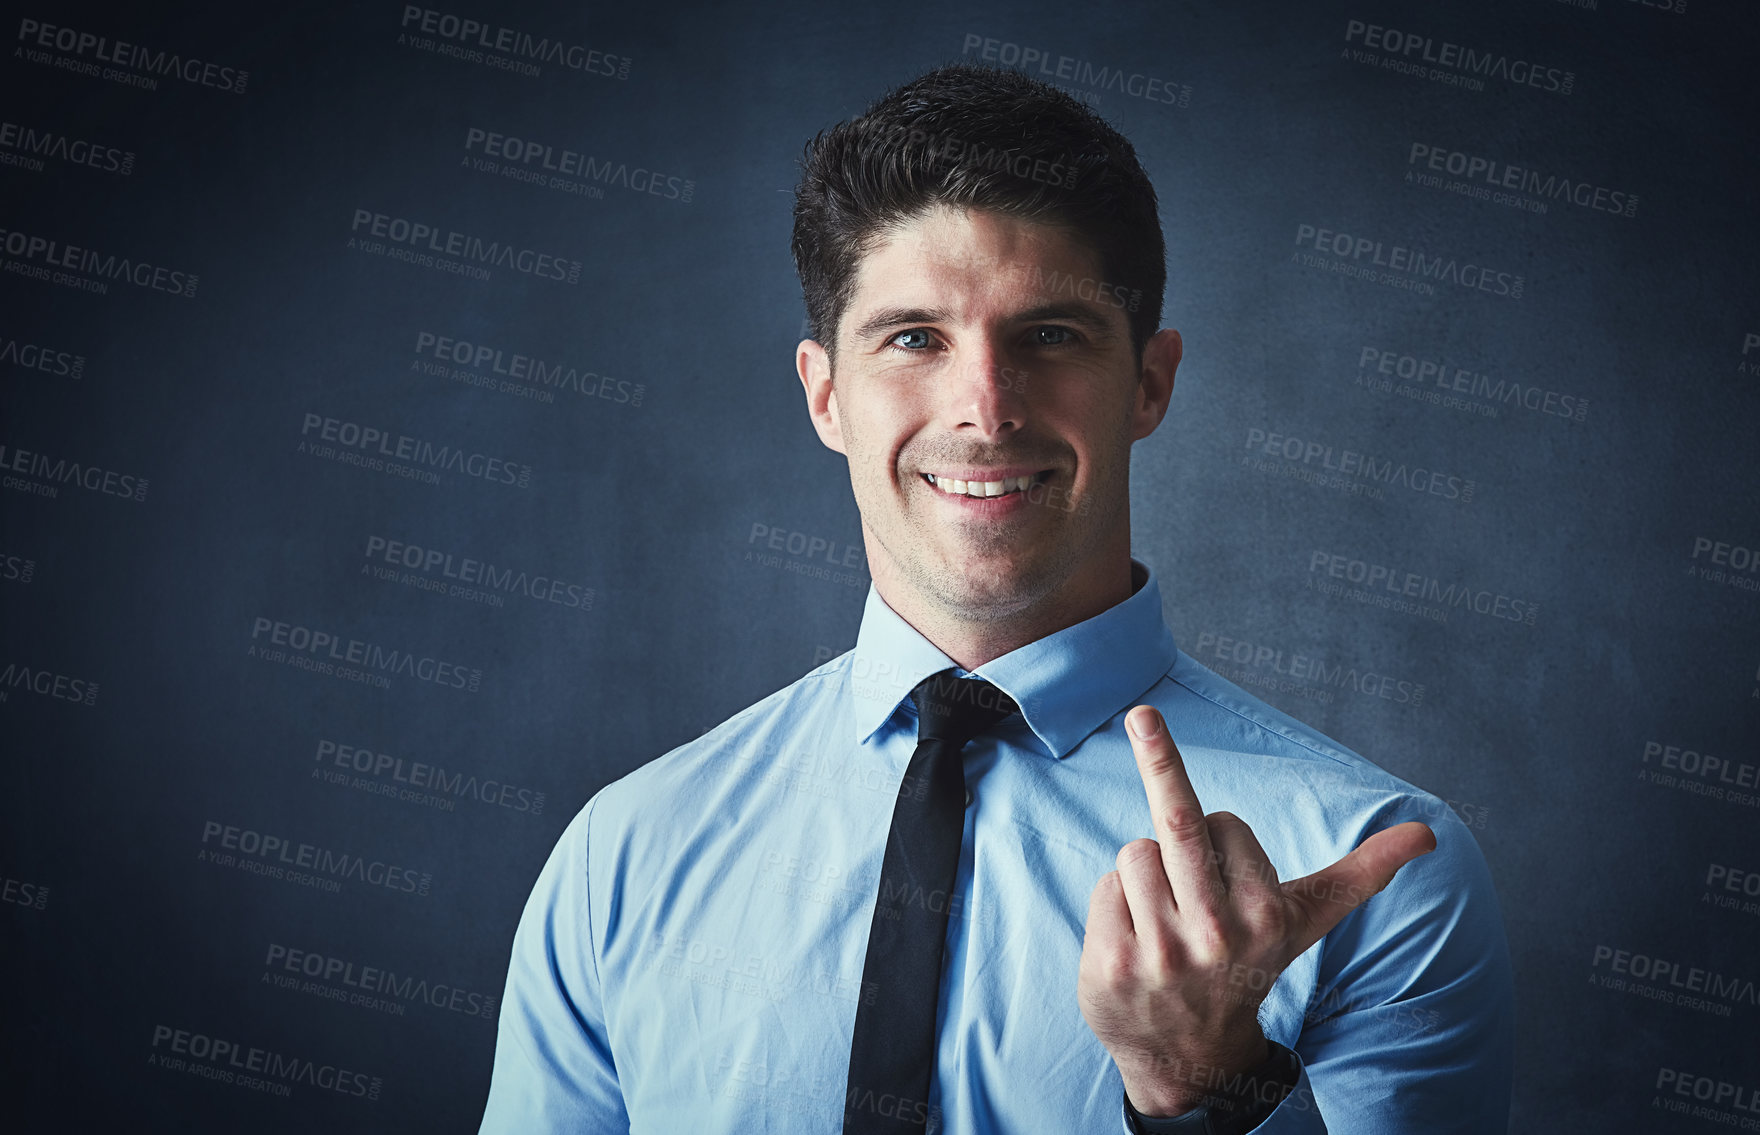 Buy stock photo Studio portrait of a young businessman showing the middle finger against a dark background